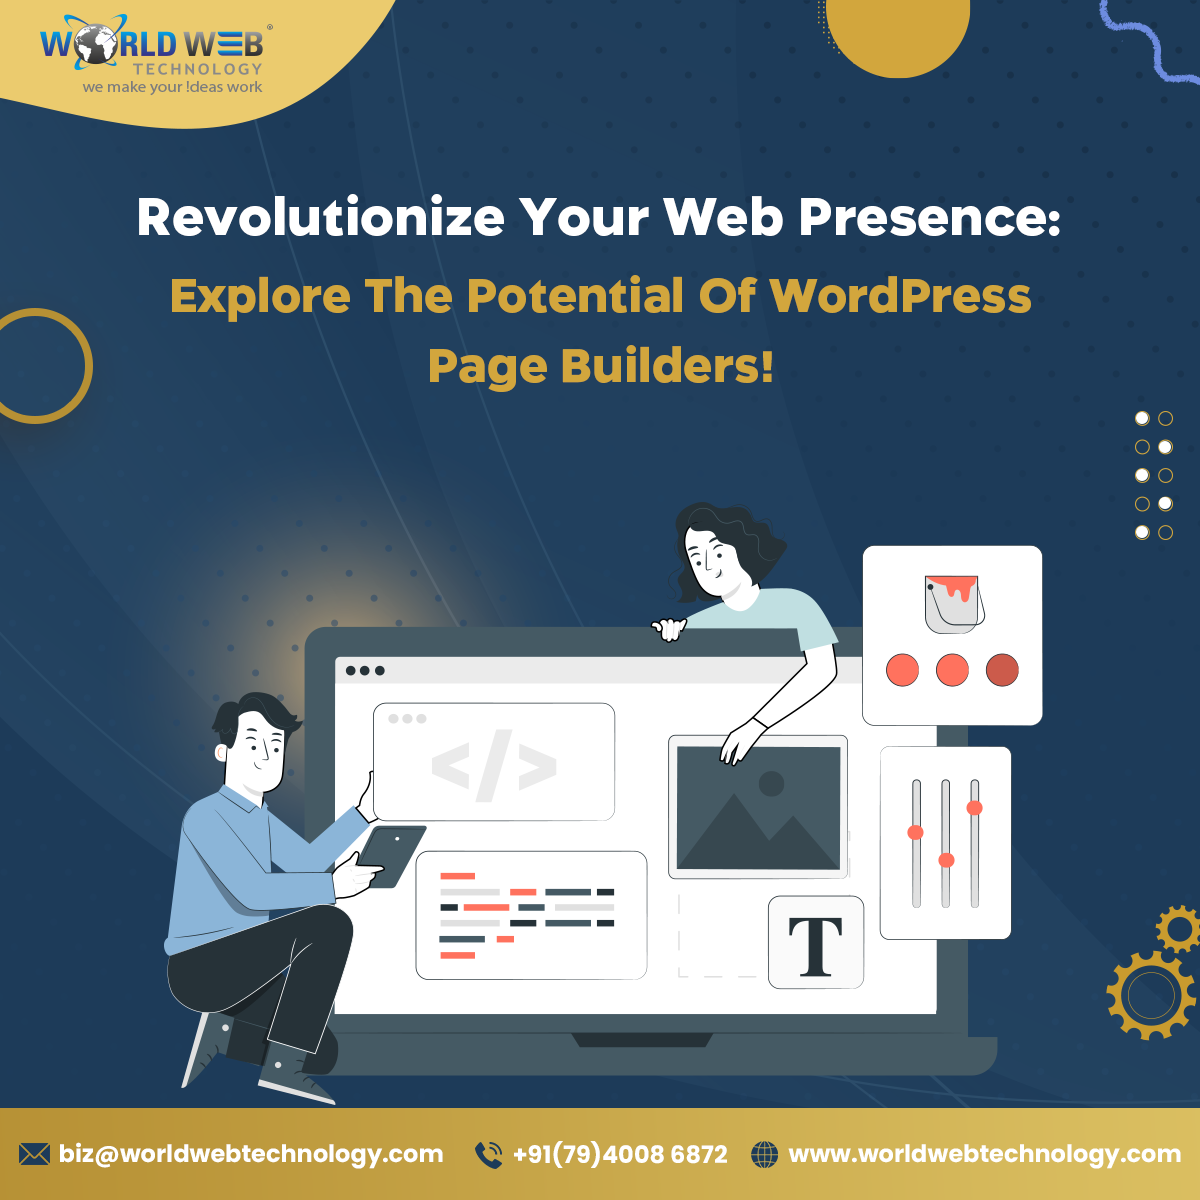 Revolutionize Your Web Presence Explore The Potential Of WordPress Page Builders!